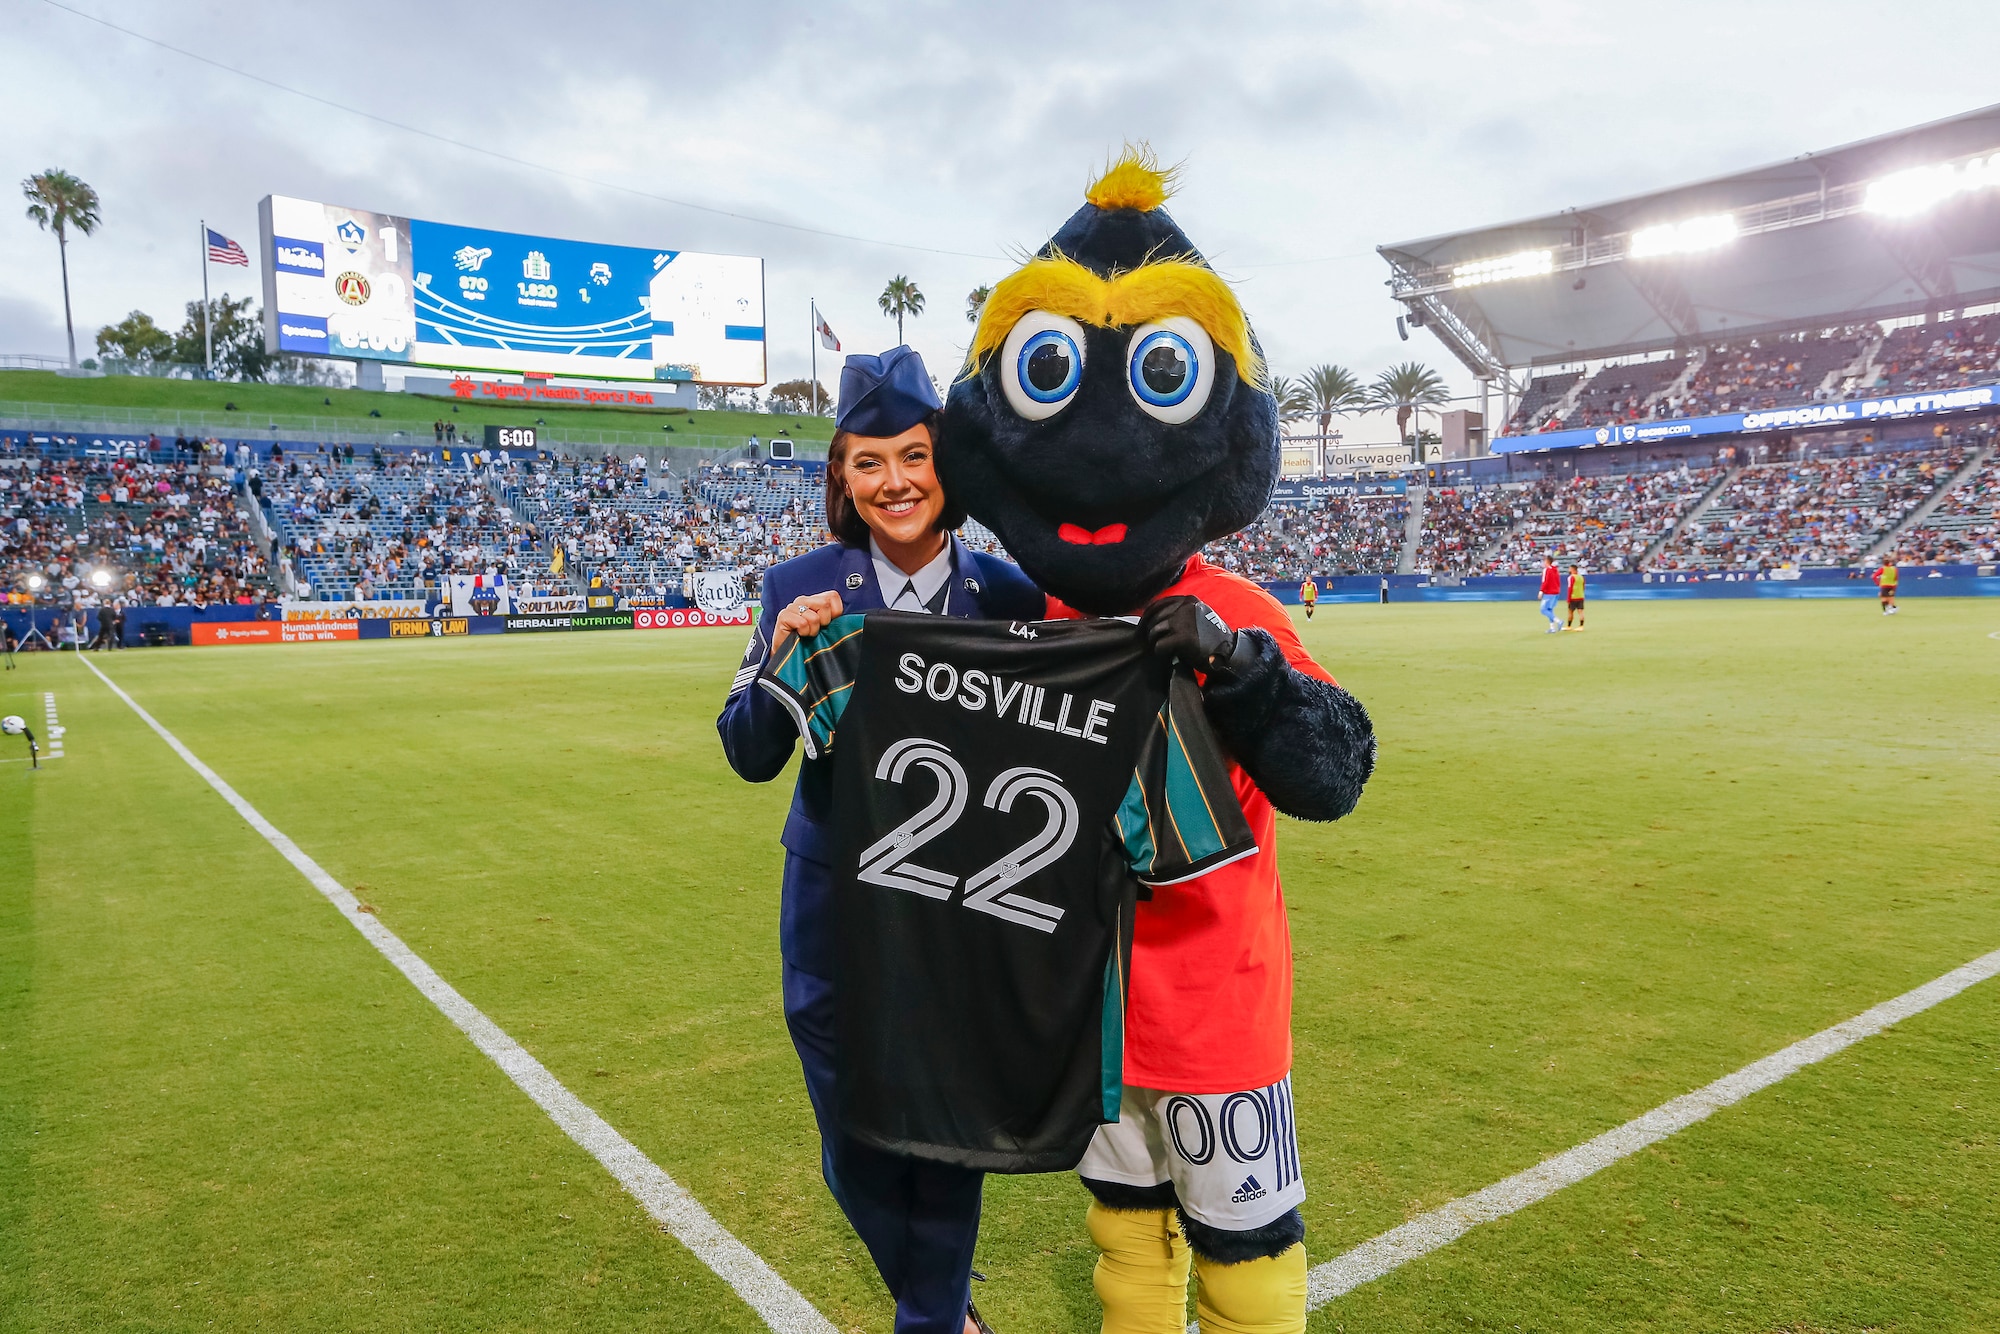 It was a surreal experience for U.S. Space Force (USSF) Guardian Sgt. Michaela Sosville when she entered the field and was recognized as the “Hero of the Game” during the July 24 LA Galaxy major league soccer game against the Atlanta United at Dignity Health Sports Park in Carson, California.